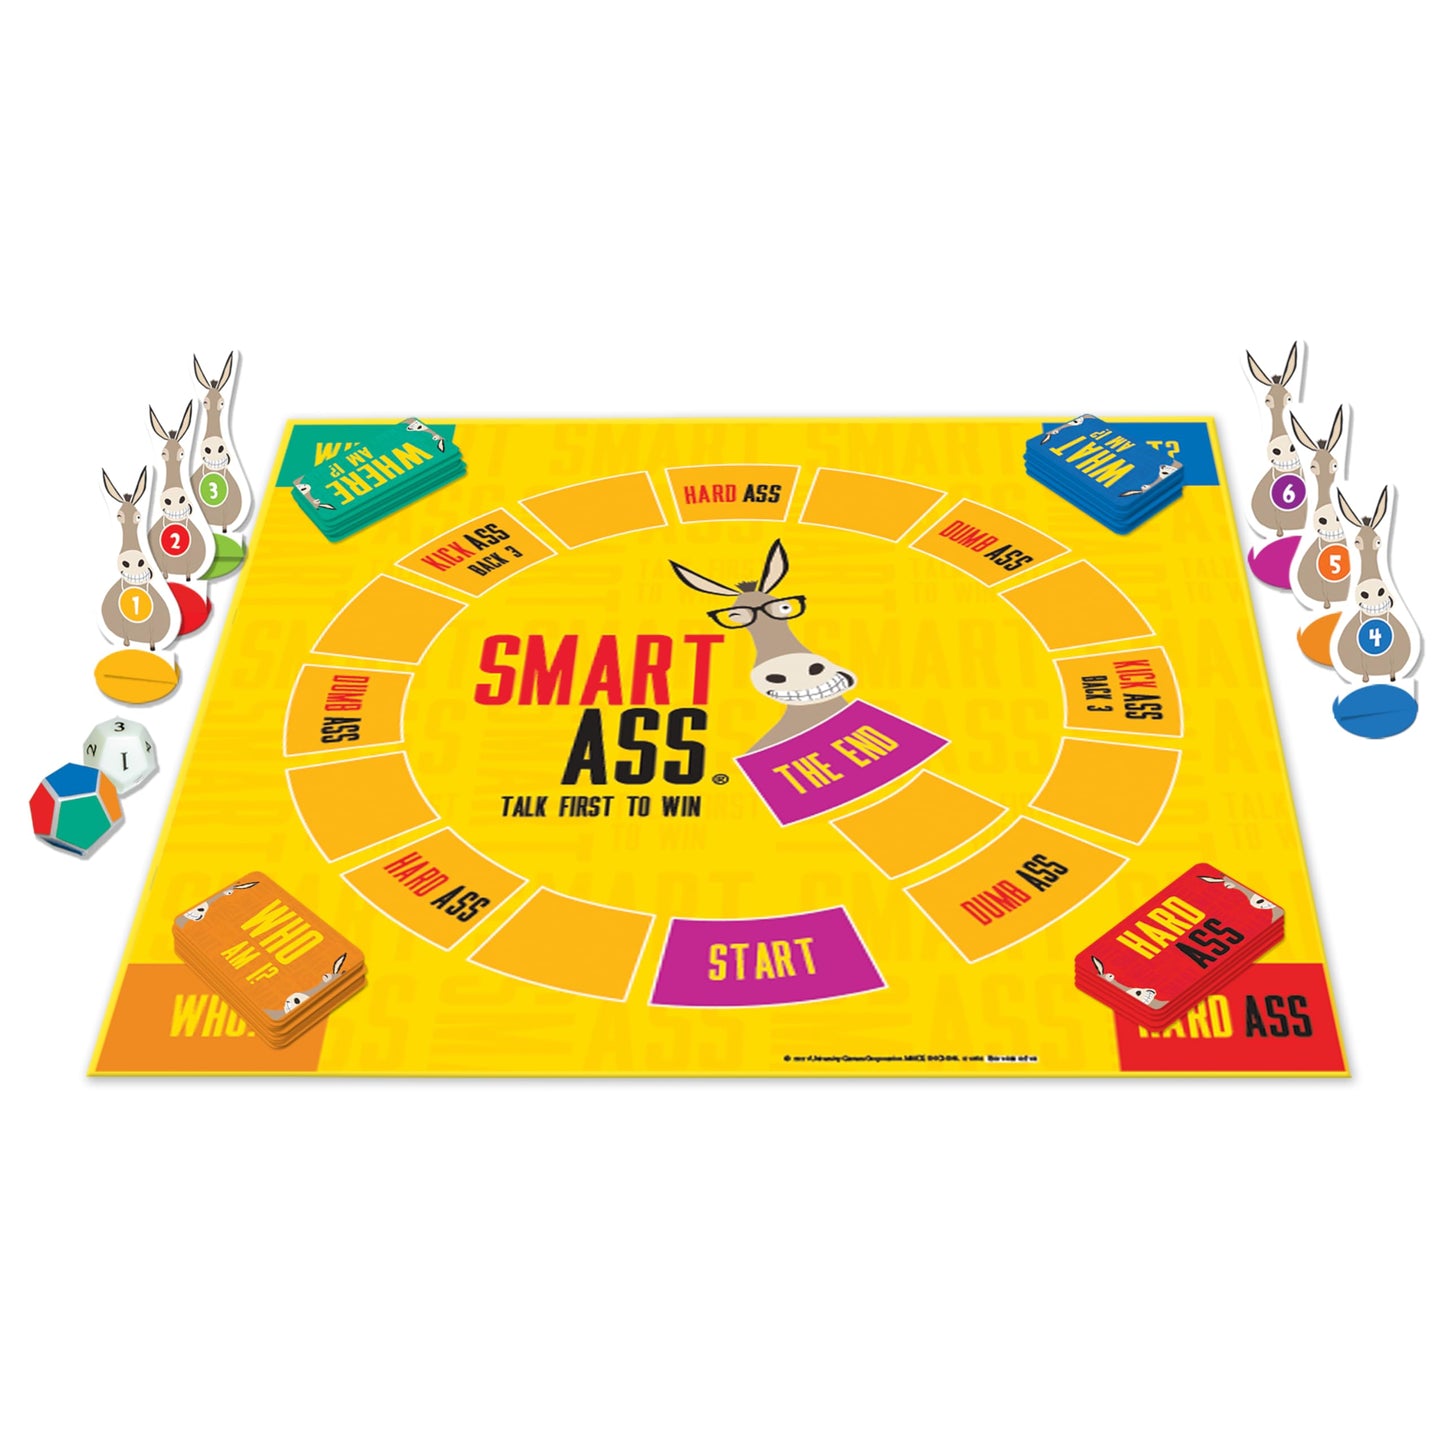 University Games | Smart Ass Trivia The Ultimate Who, What, Where Party Game , for Families and Adults Ages 12 and Up and 2 to 6 Players